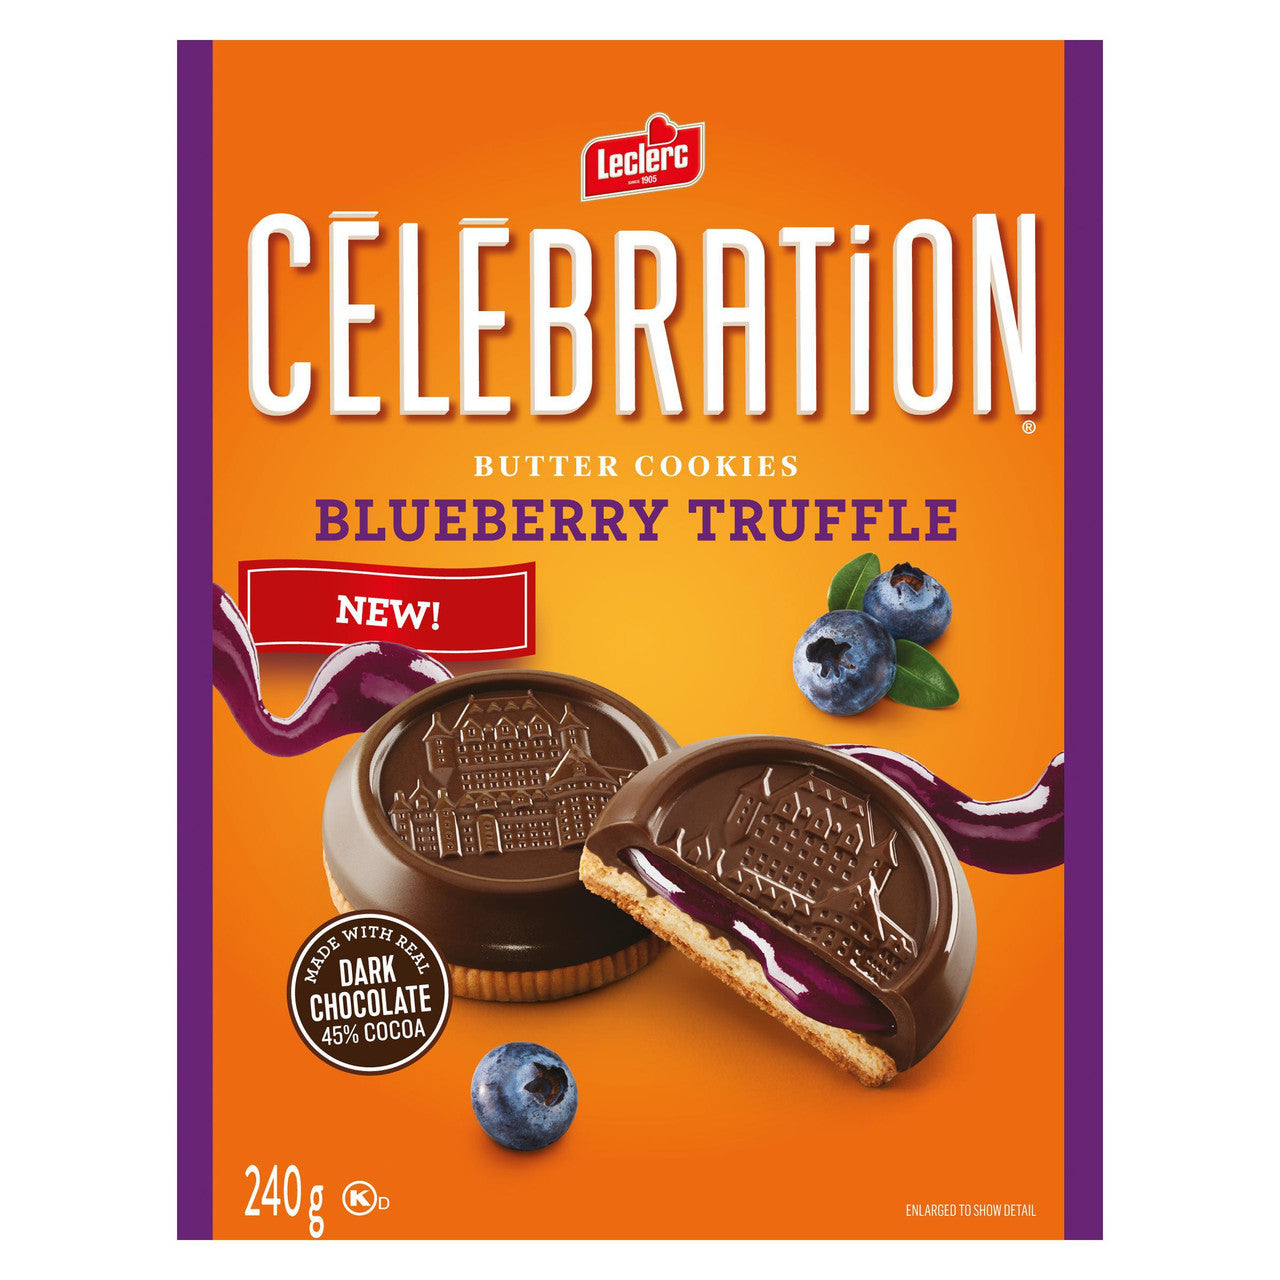 Leclerc Celebration Blueberry Truffle Cookies, 240g/8.5 oz. Box {Imported from Canada}